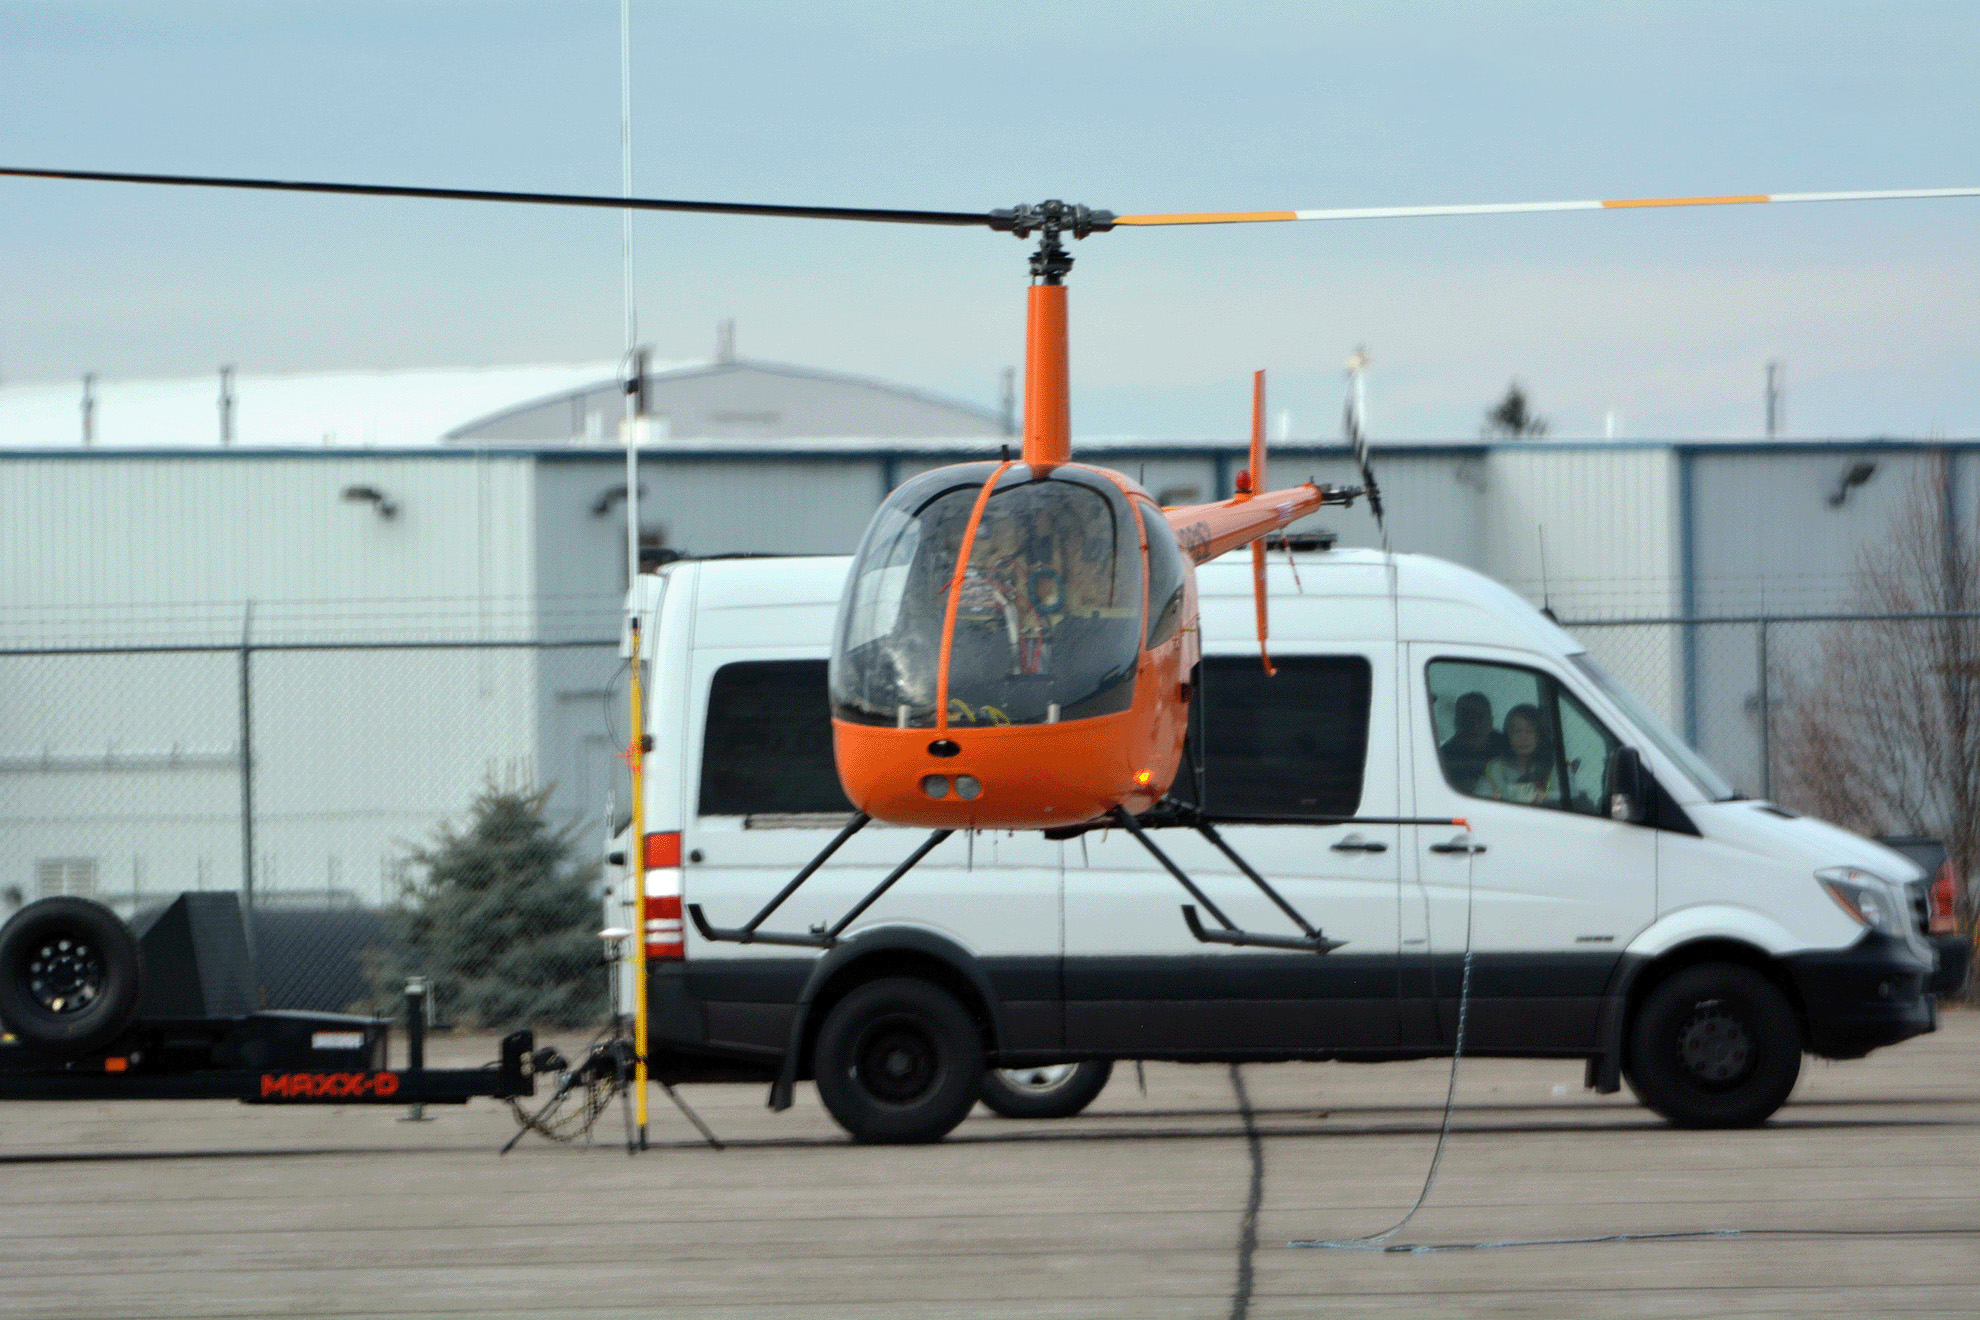 Safer skies with self-flying helicopters